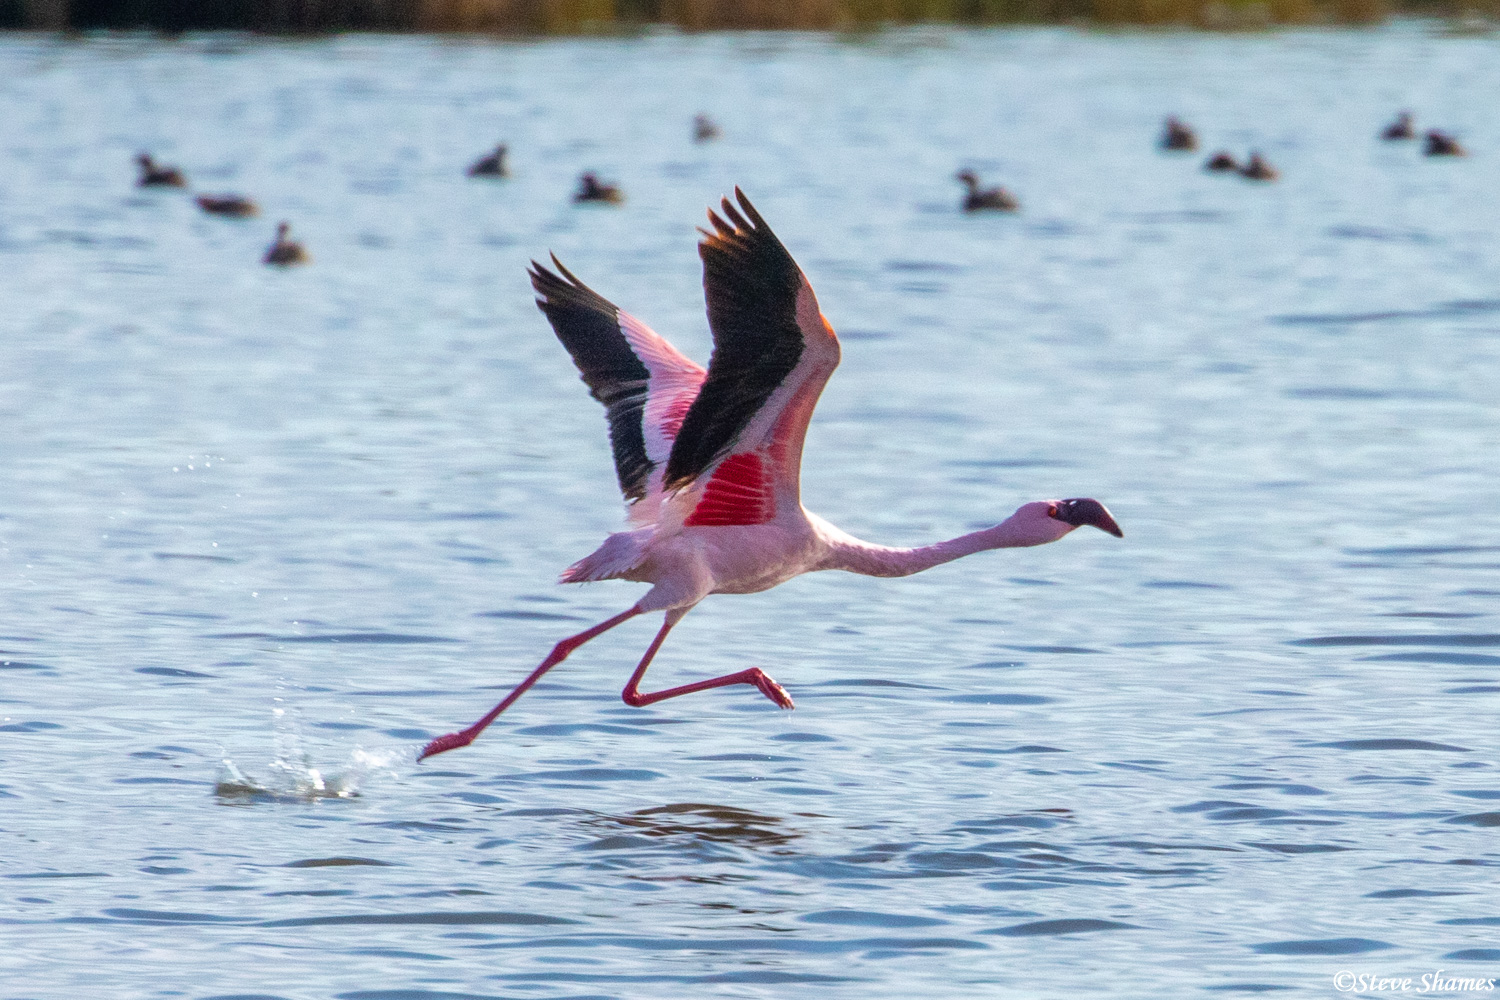 Flamingos get airborne by running on the water. Its quite a sight to see.